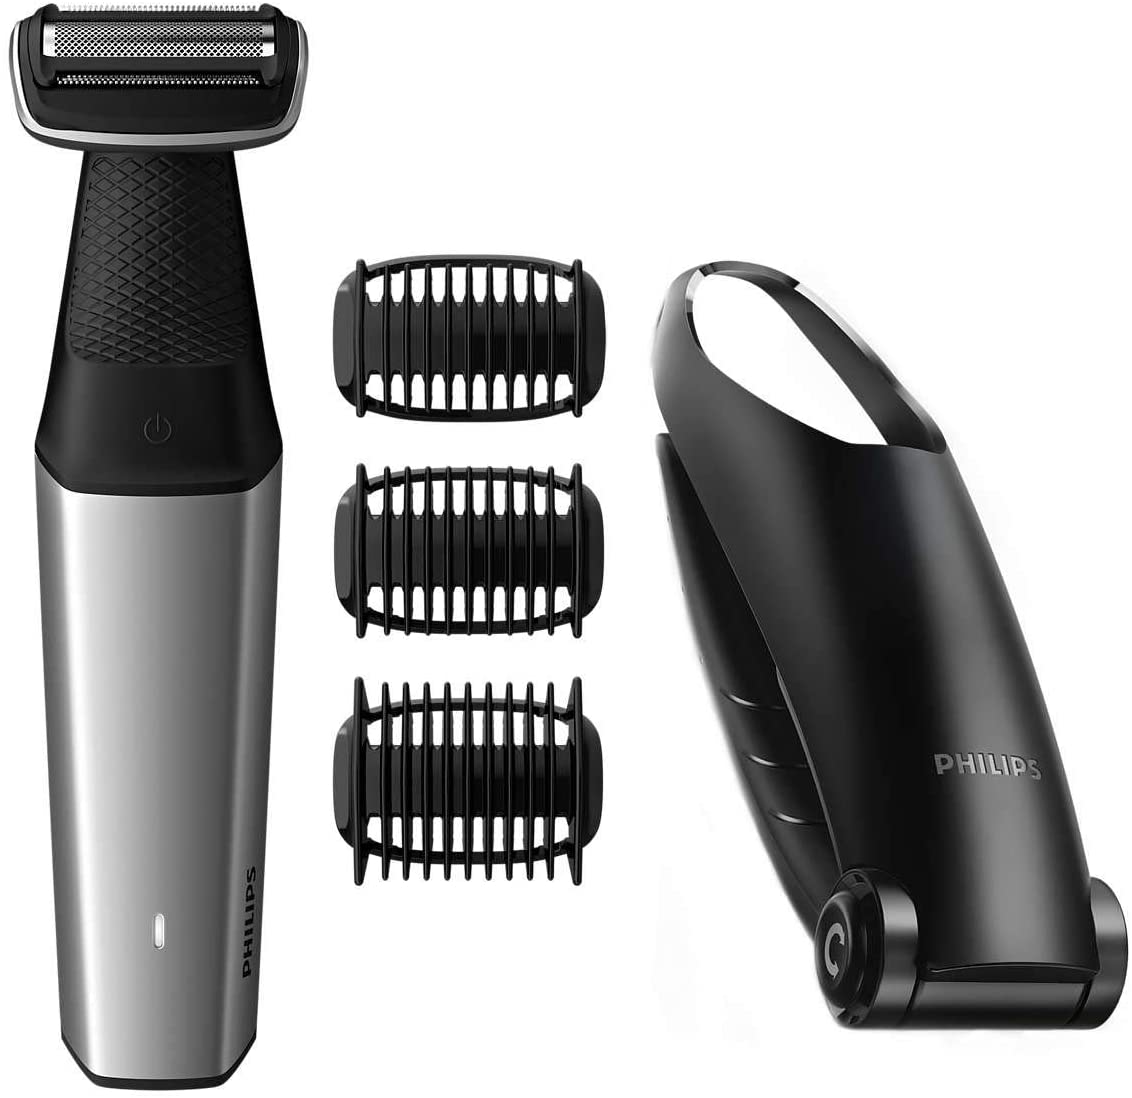 Philips Body Groomer, Series 5000 Showerproof with Back Reaching Attachment and Skin Comfort System